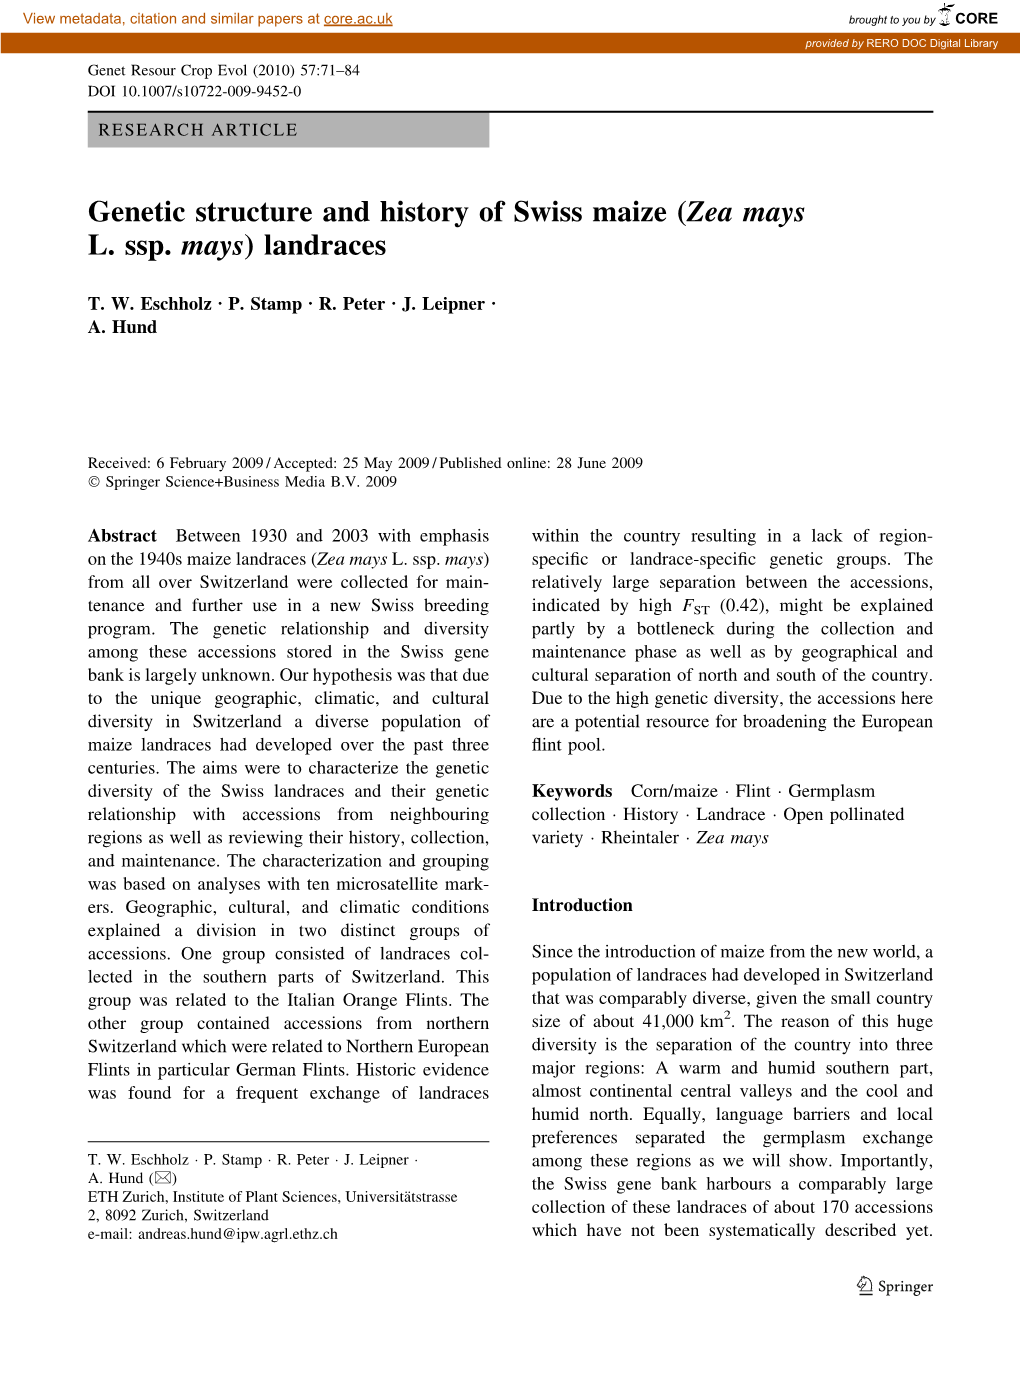 Genetic Structure and History of Swiss Maize (Zea Mays L